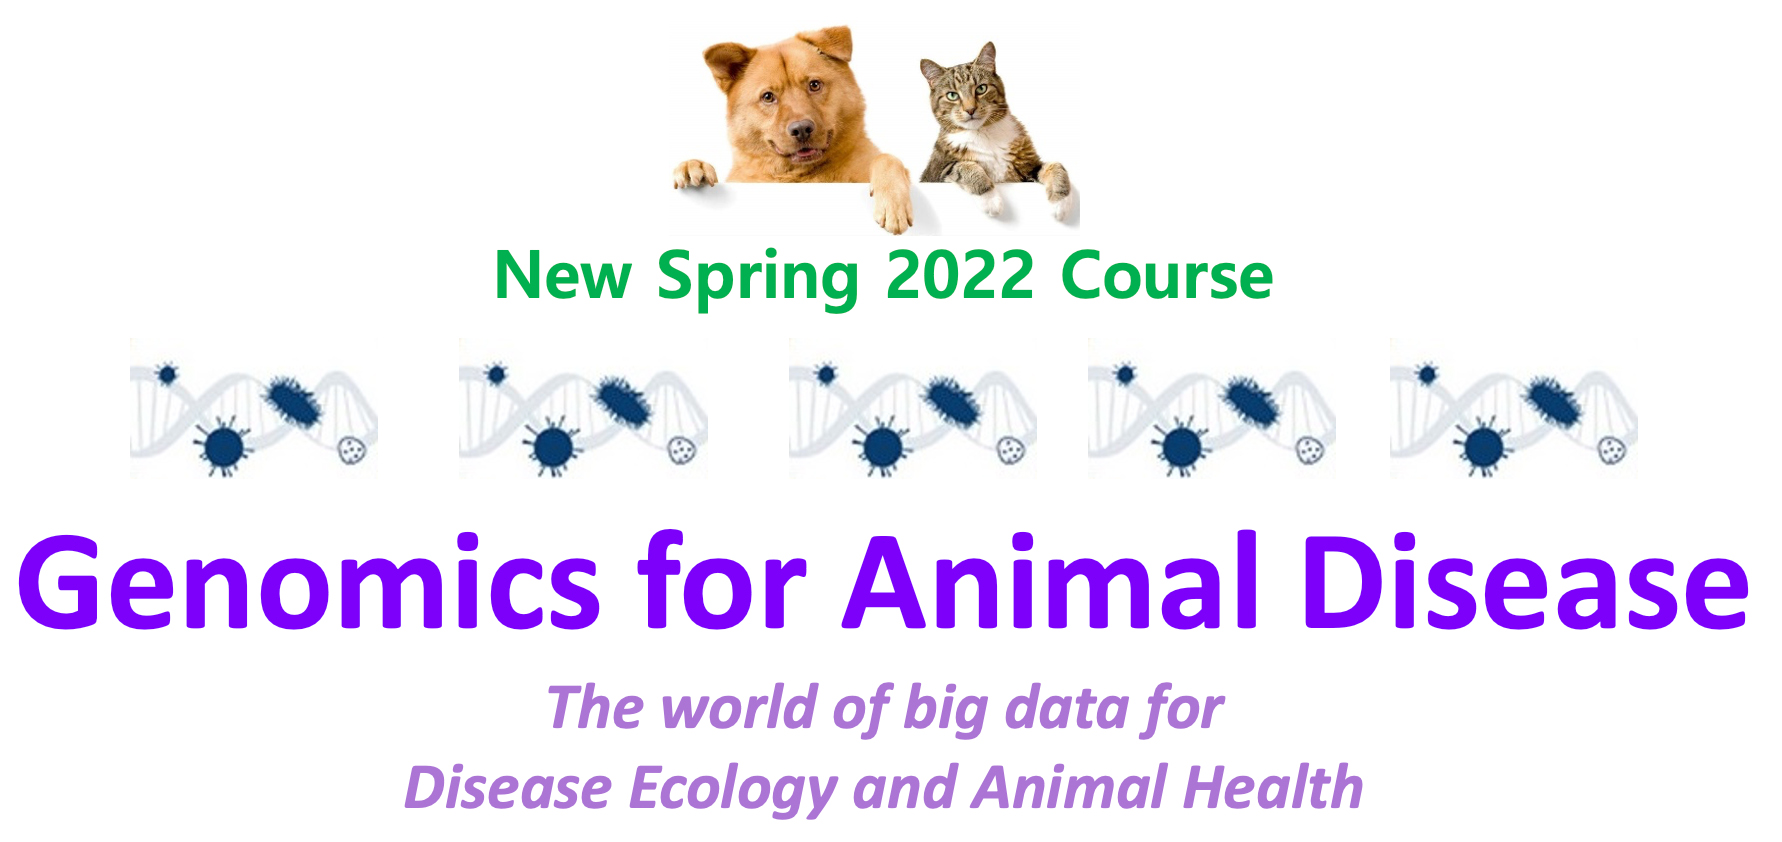 Genomics for Animal disease: The world of big data for disease ecology and animal health